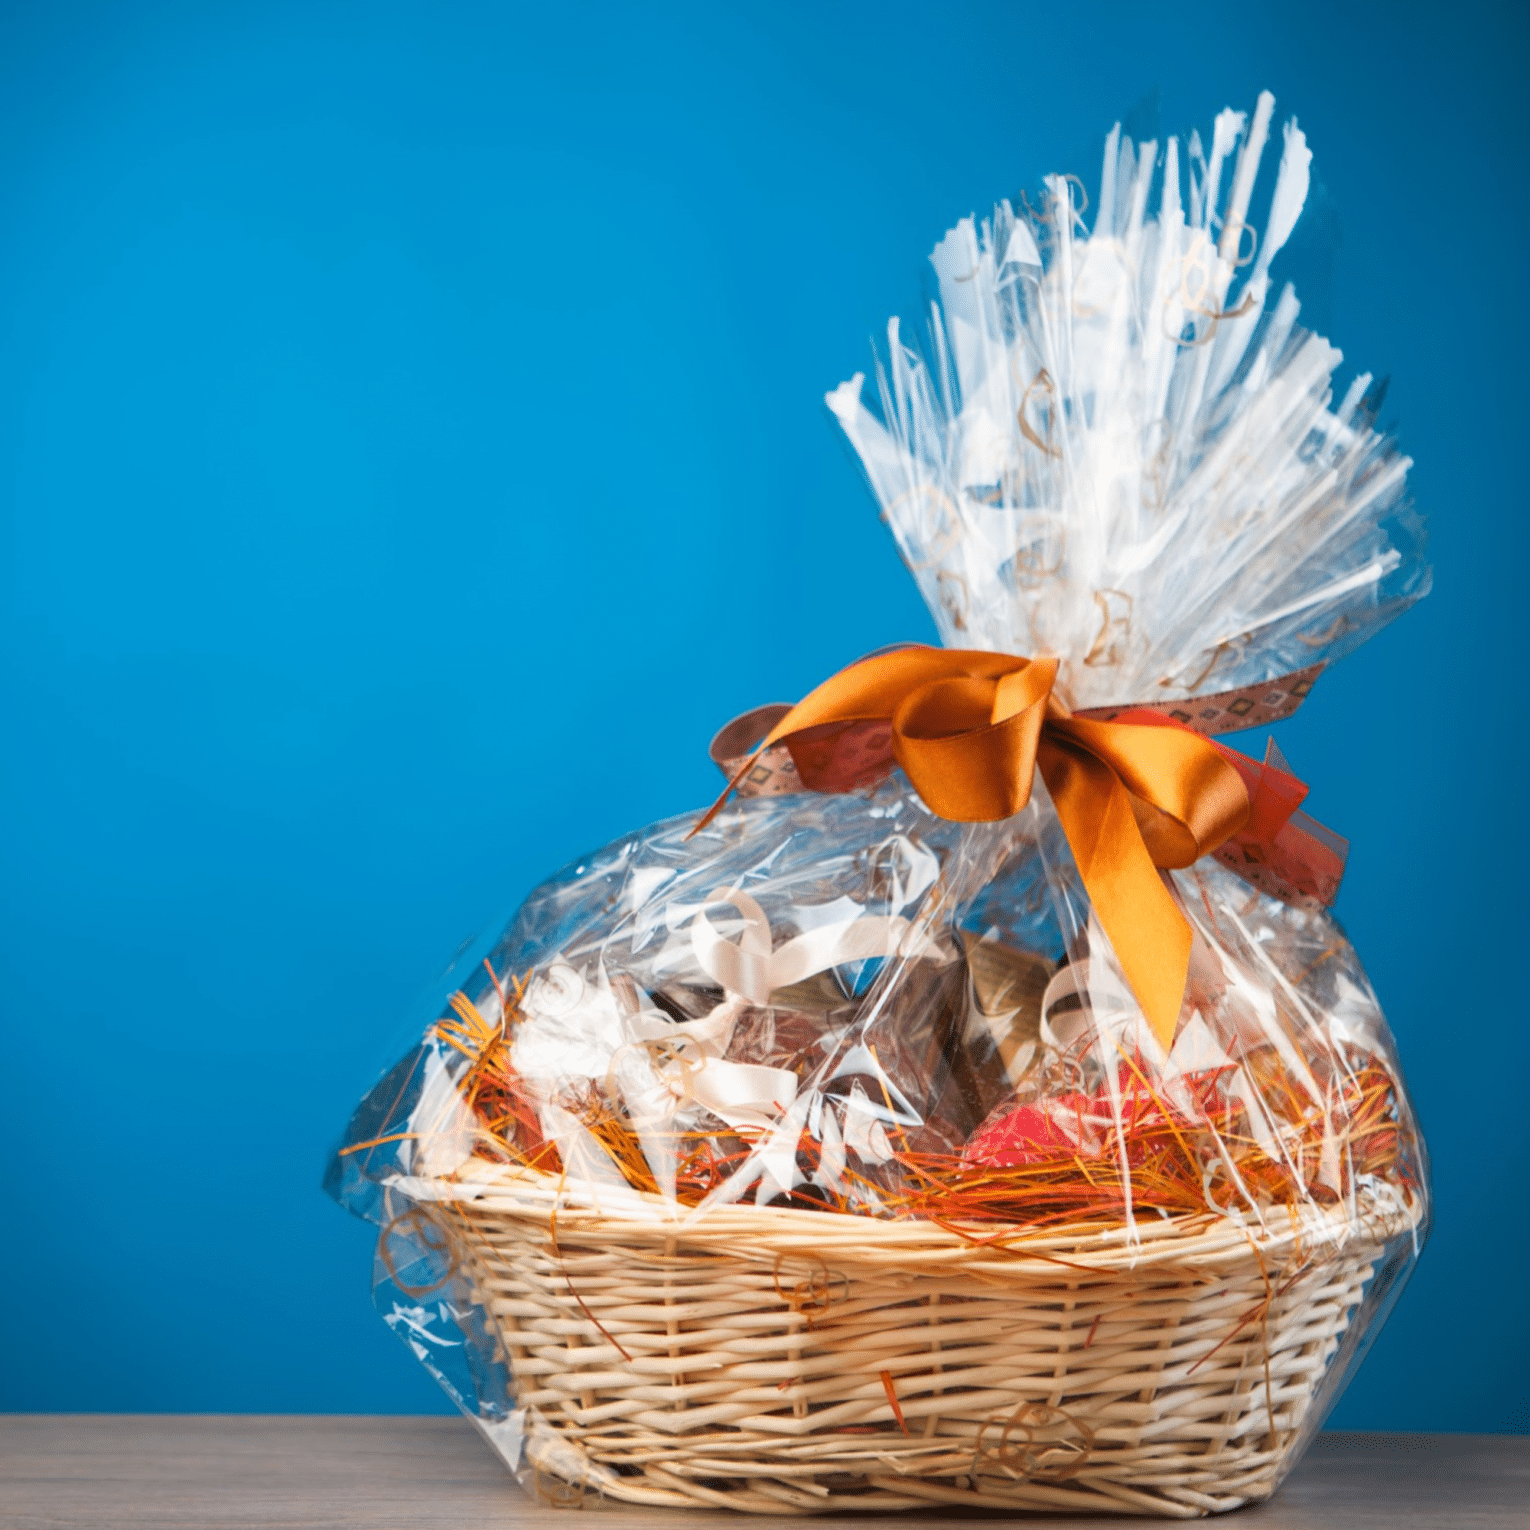 The Ultimate Guide for Creating DIY Gift Baskets - 30+ Ideas!